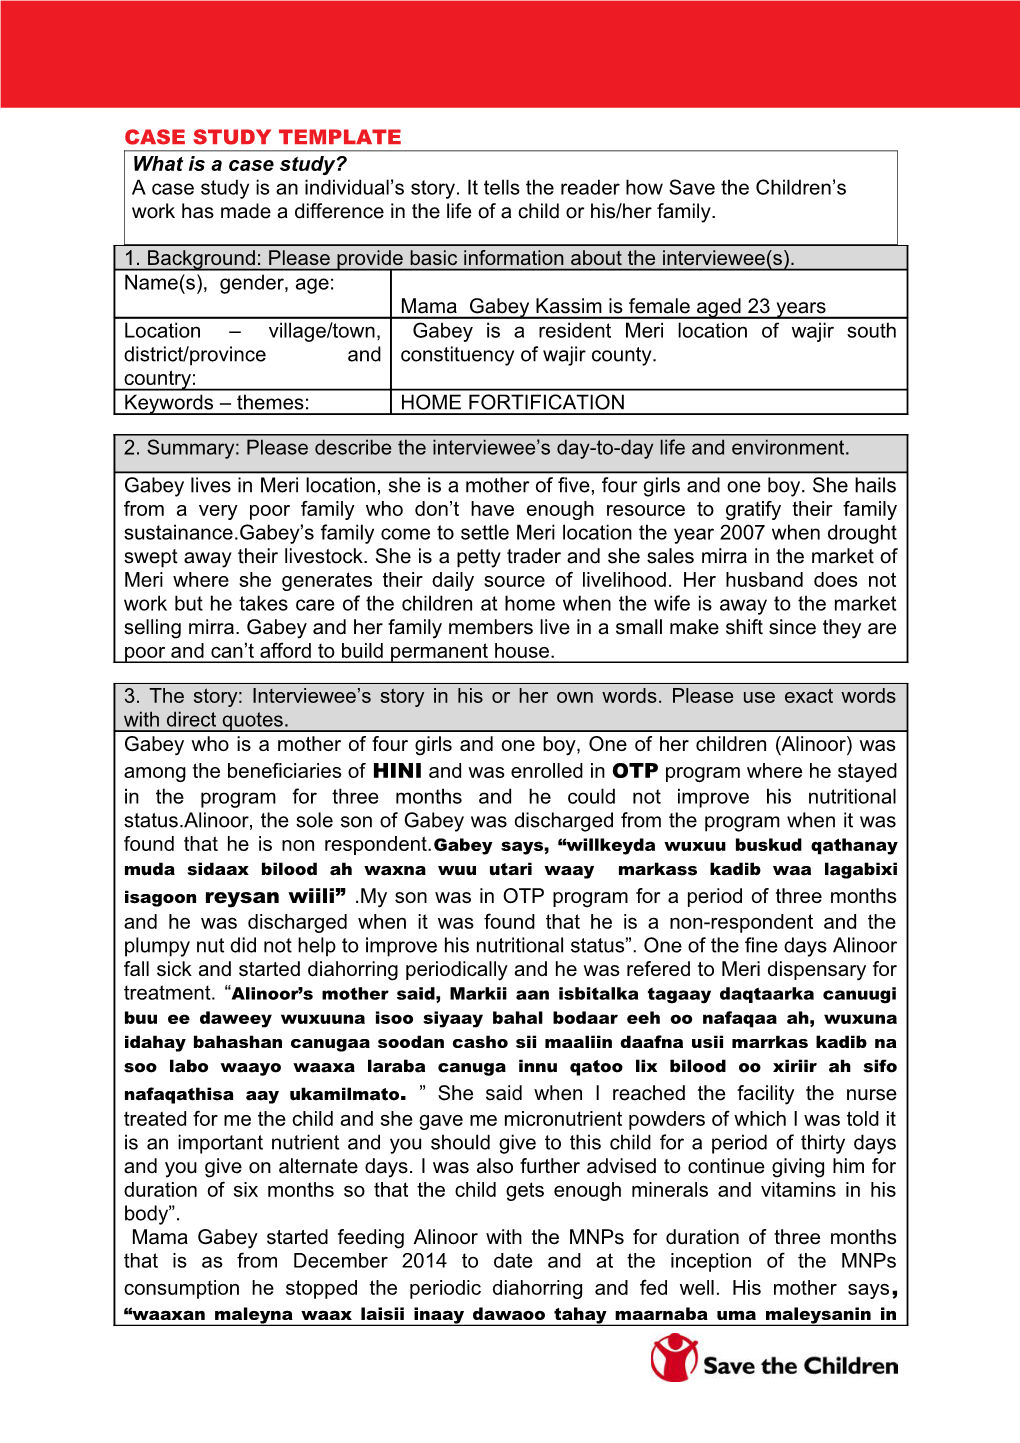 Case Study Template s1